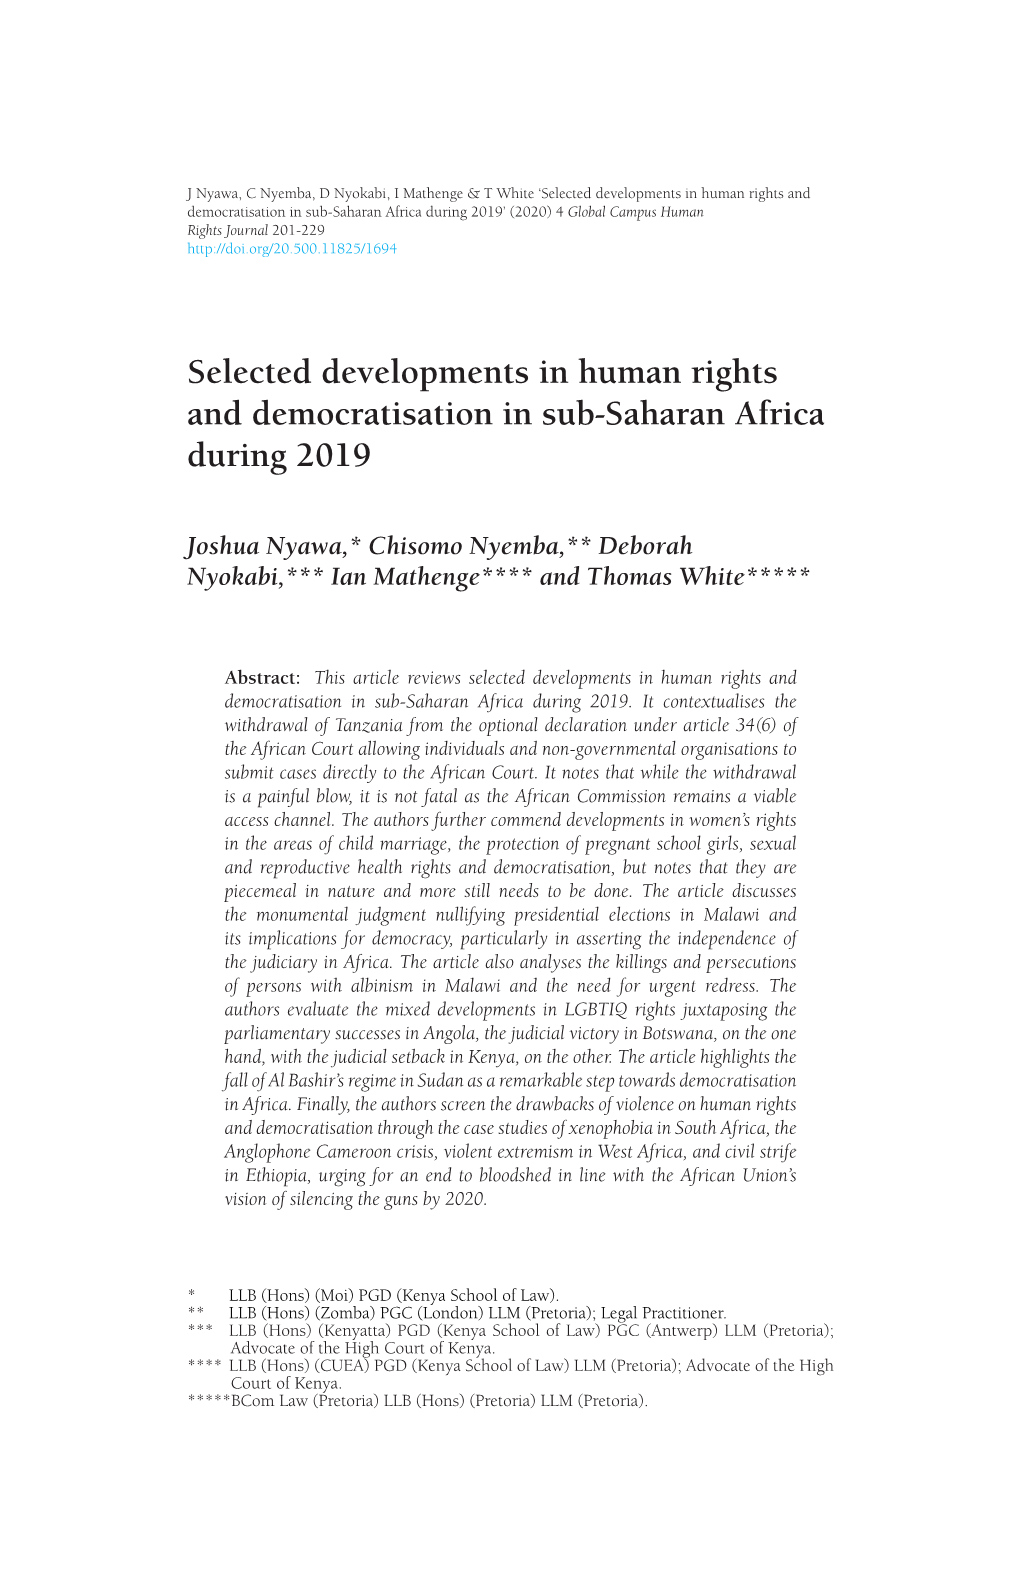 Selected Developments in Human Rights and Democratisation in Sub